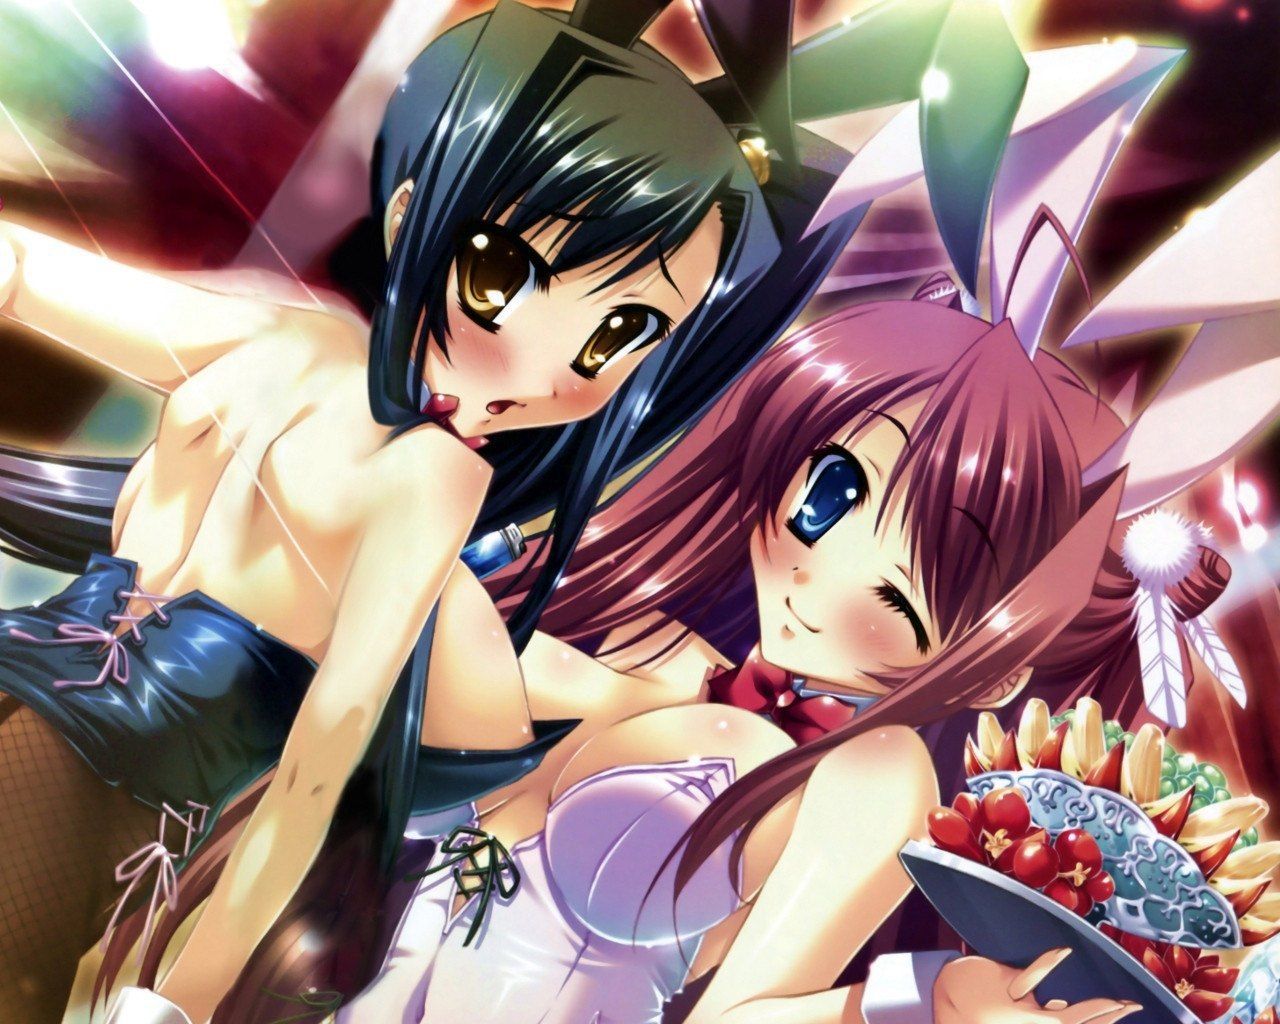 The bunny girl picture of whether you'll meet once in a lifetime real 8